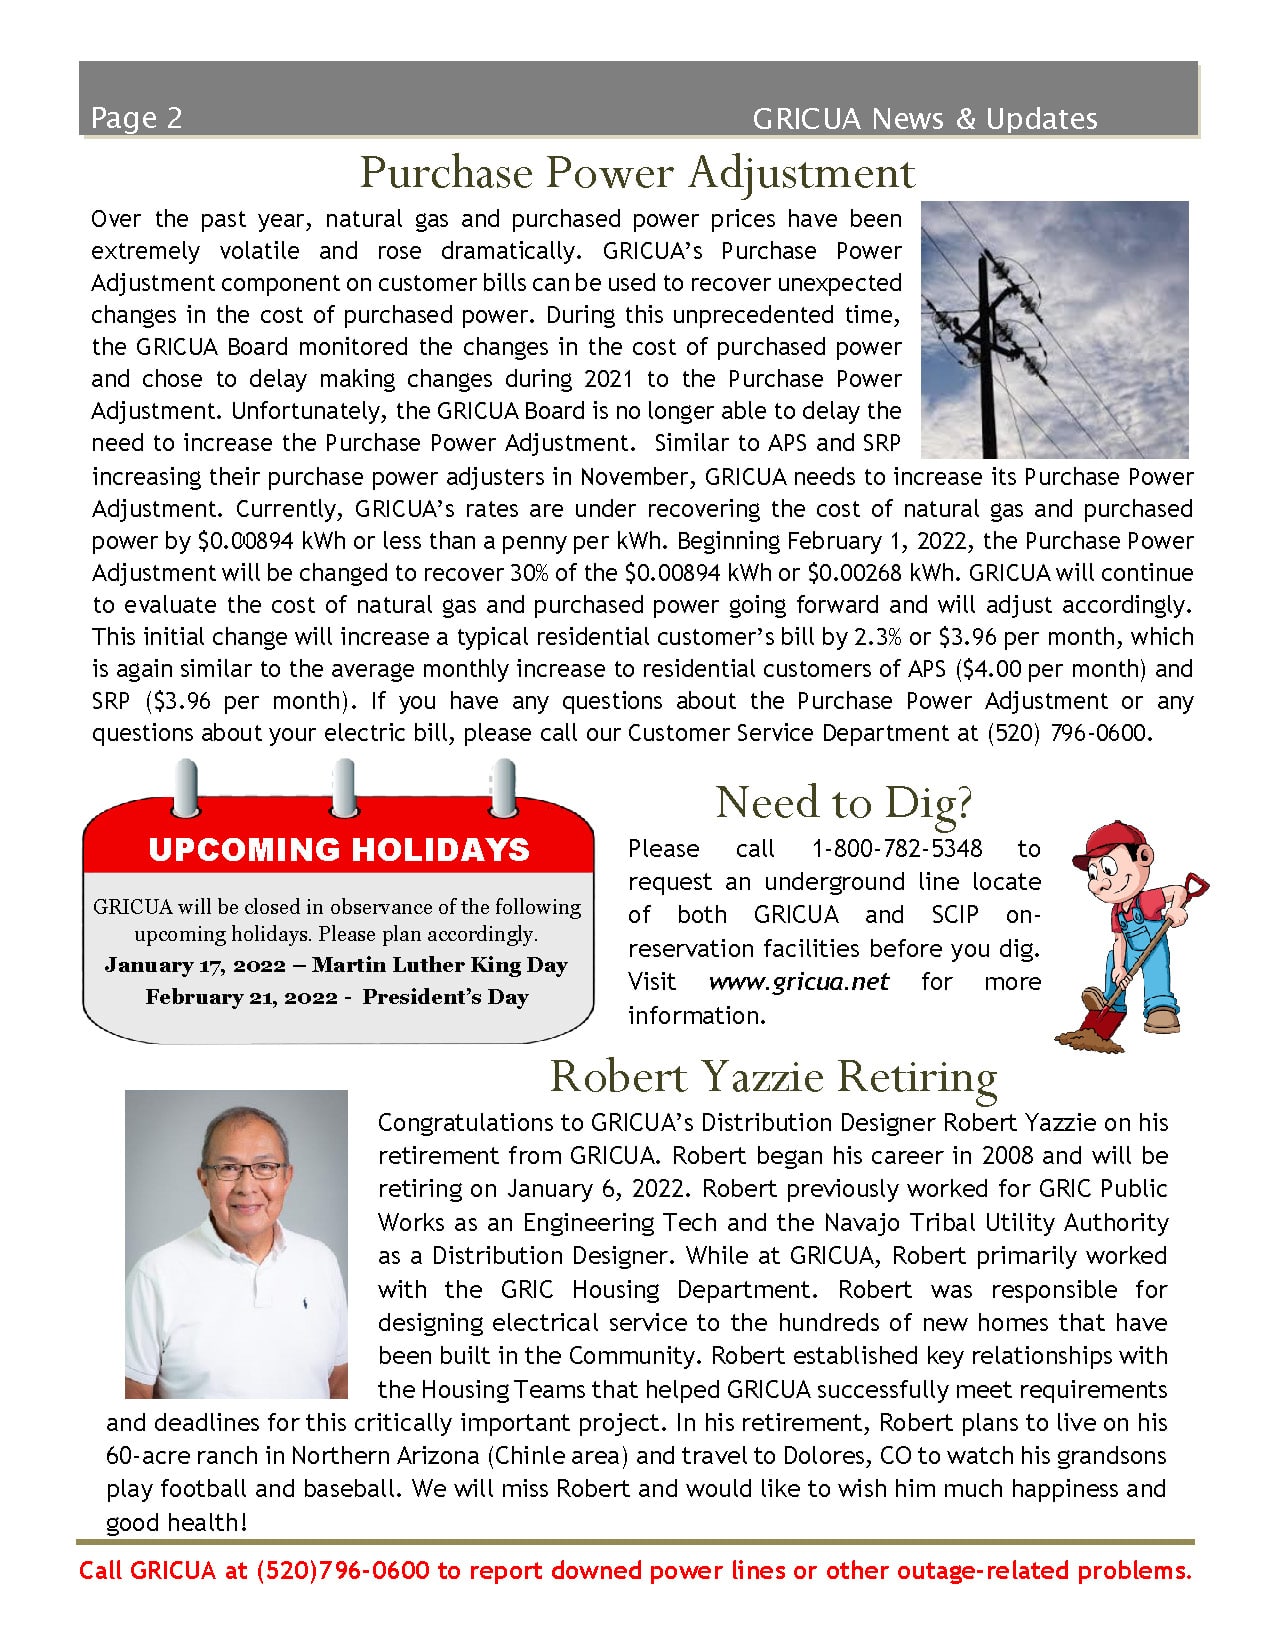 January 2022 Newsletter page 2